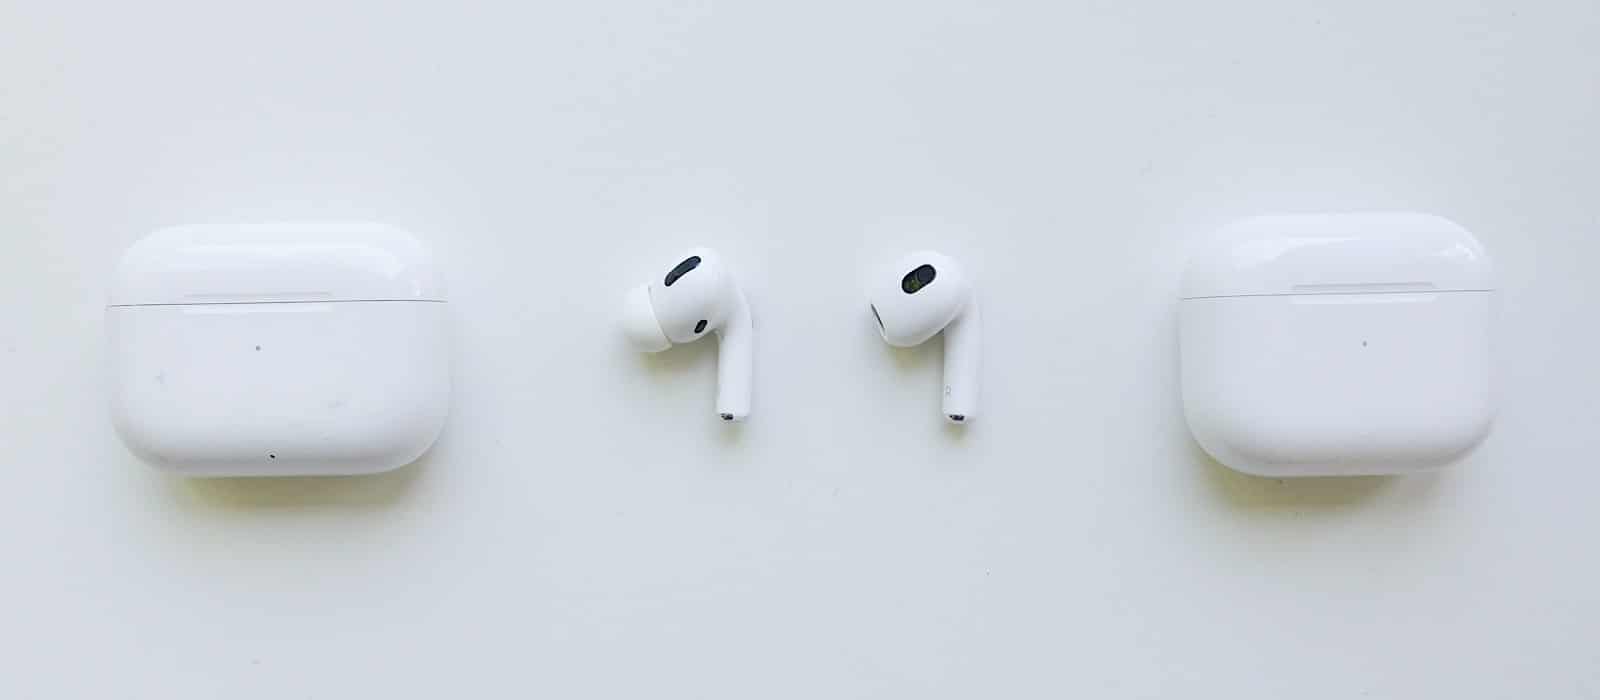 The design of the AirPods Pro (left) versus the AirPods 3 (right)